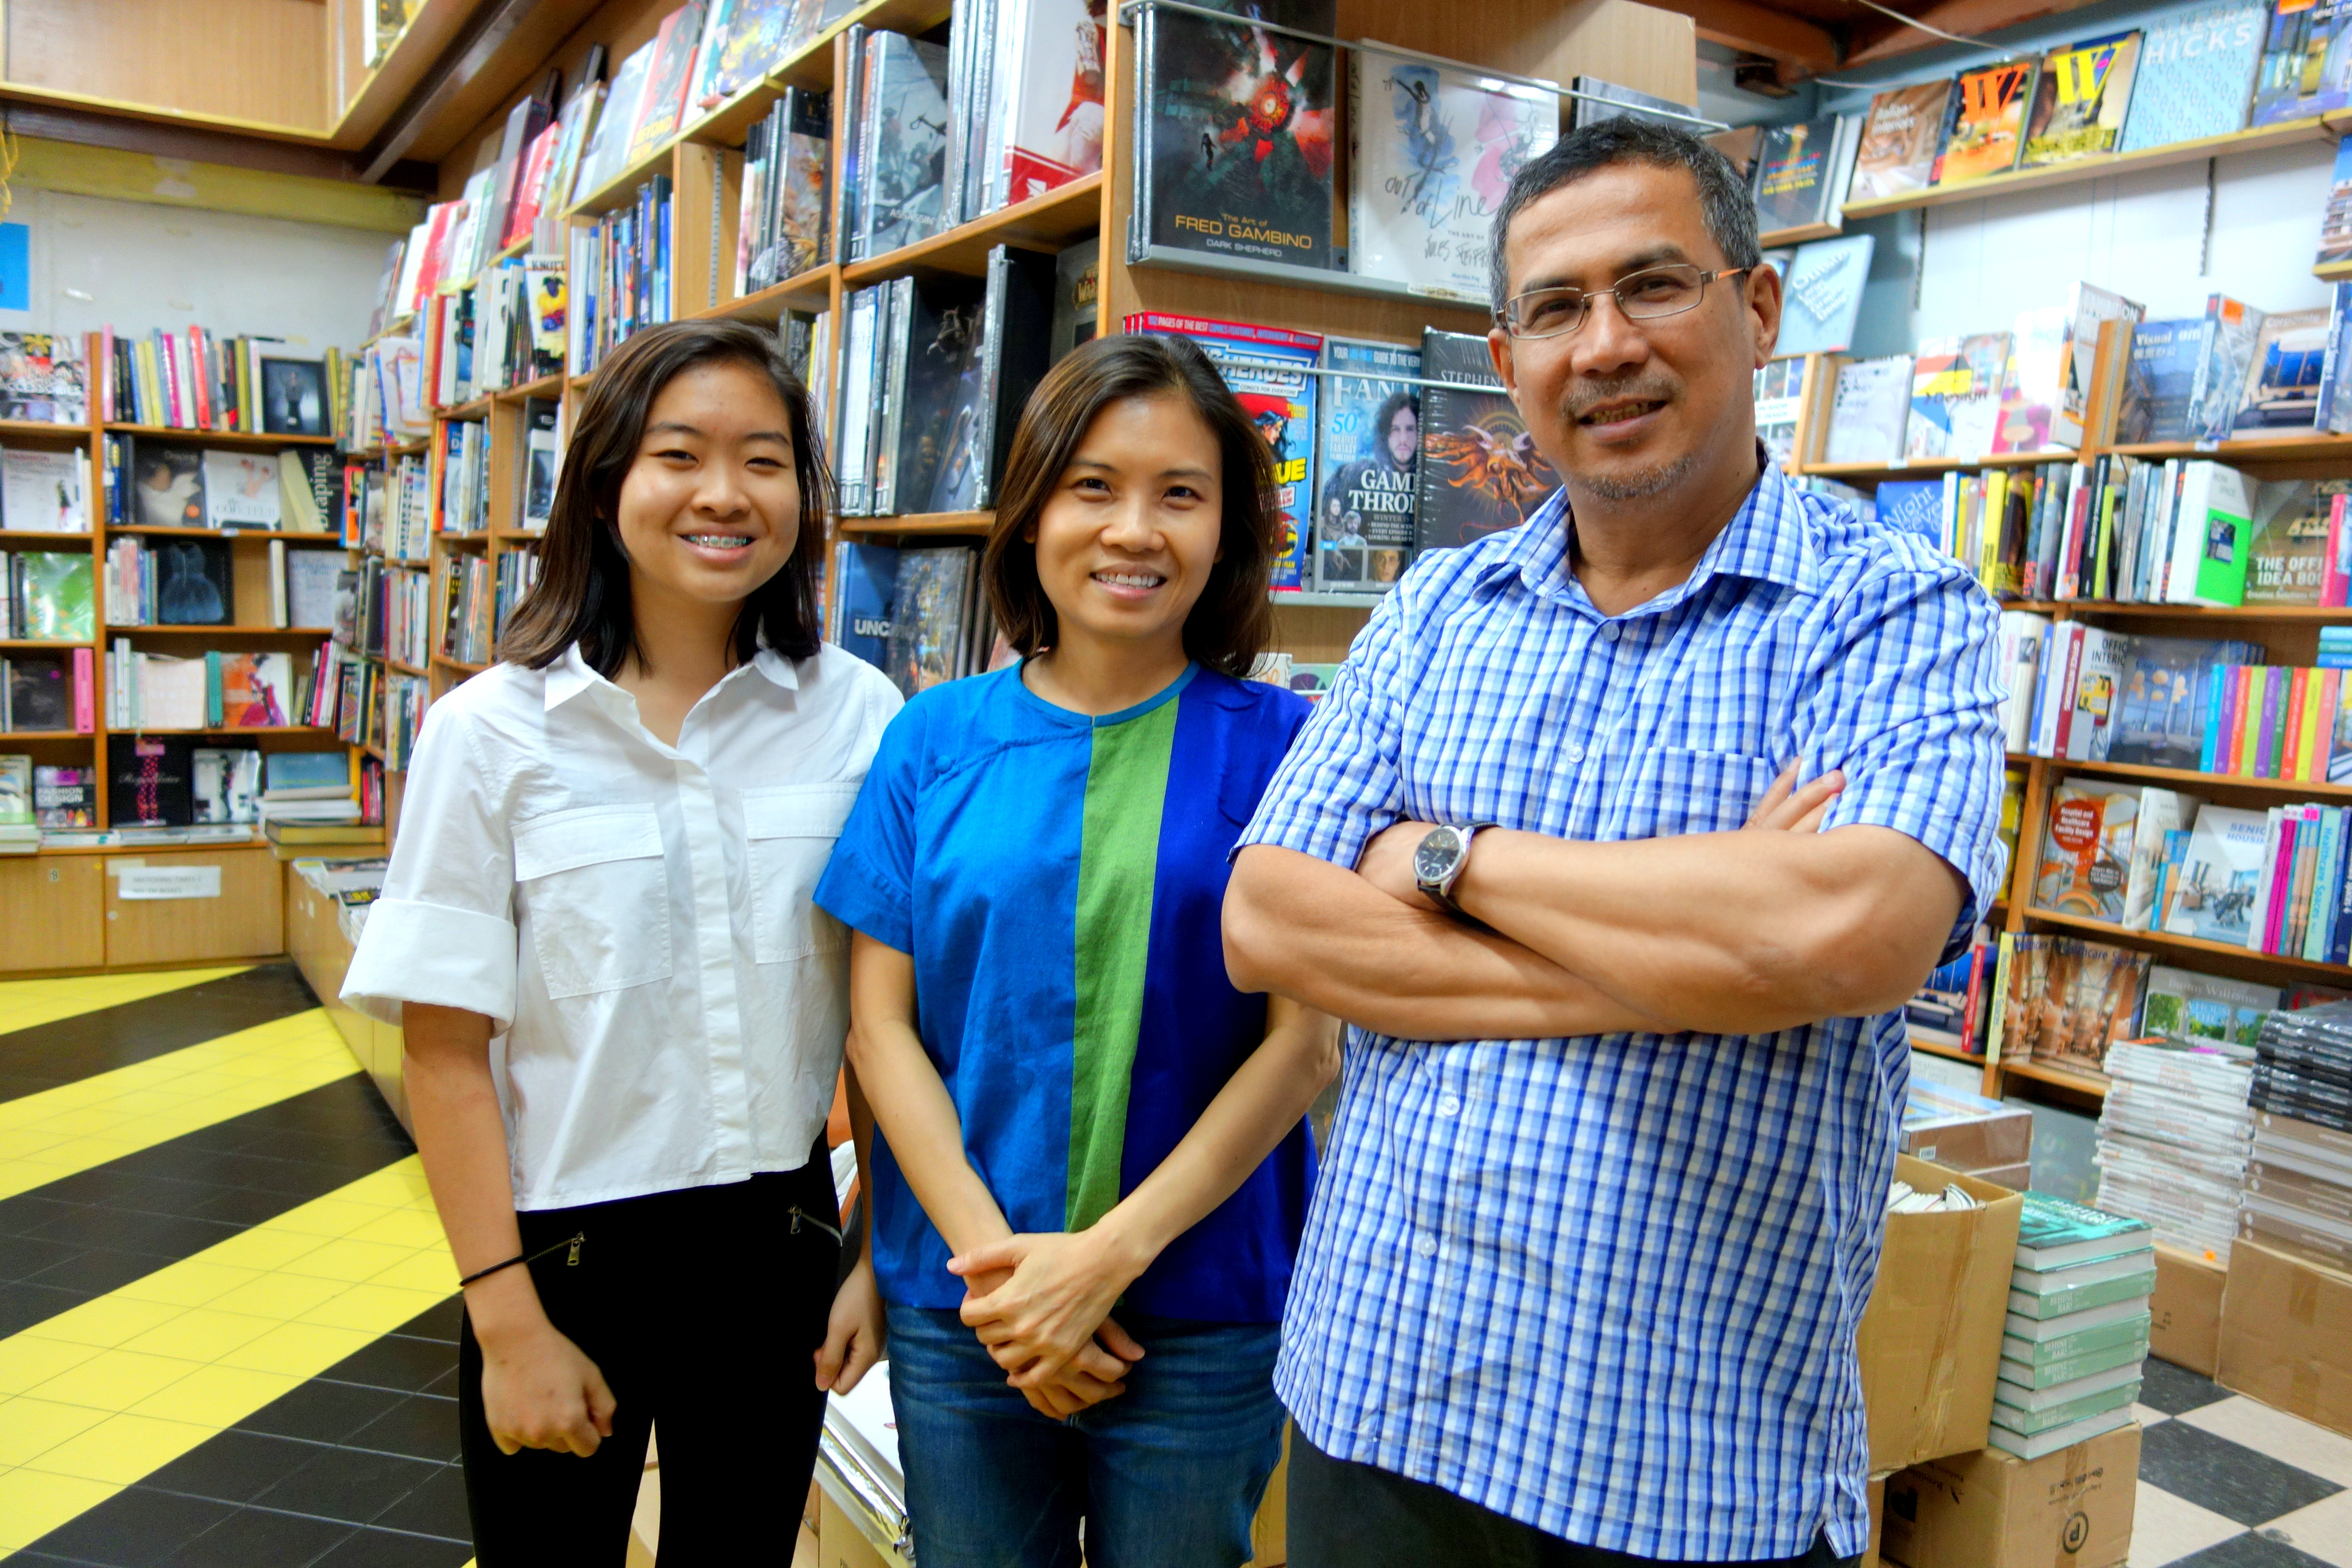 Basheer Graphic Books with the owner Abdul Nasser and his customer Dawn Liang at Bras Basah Shopping Complex in Singapore - a bookshop series by Shopkeeper Stories